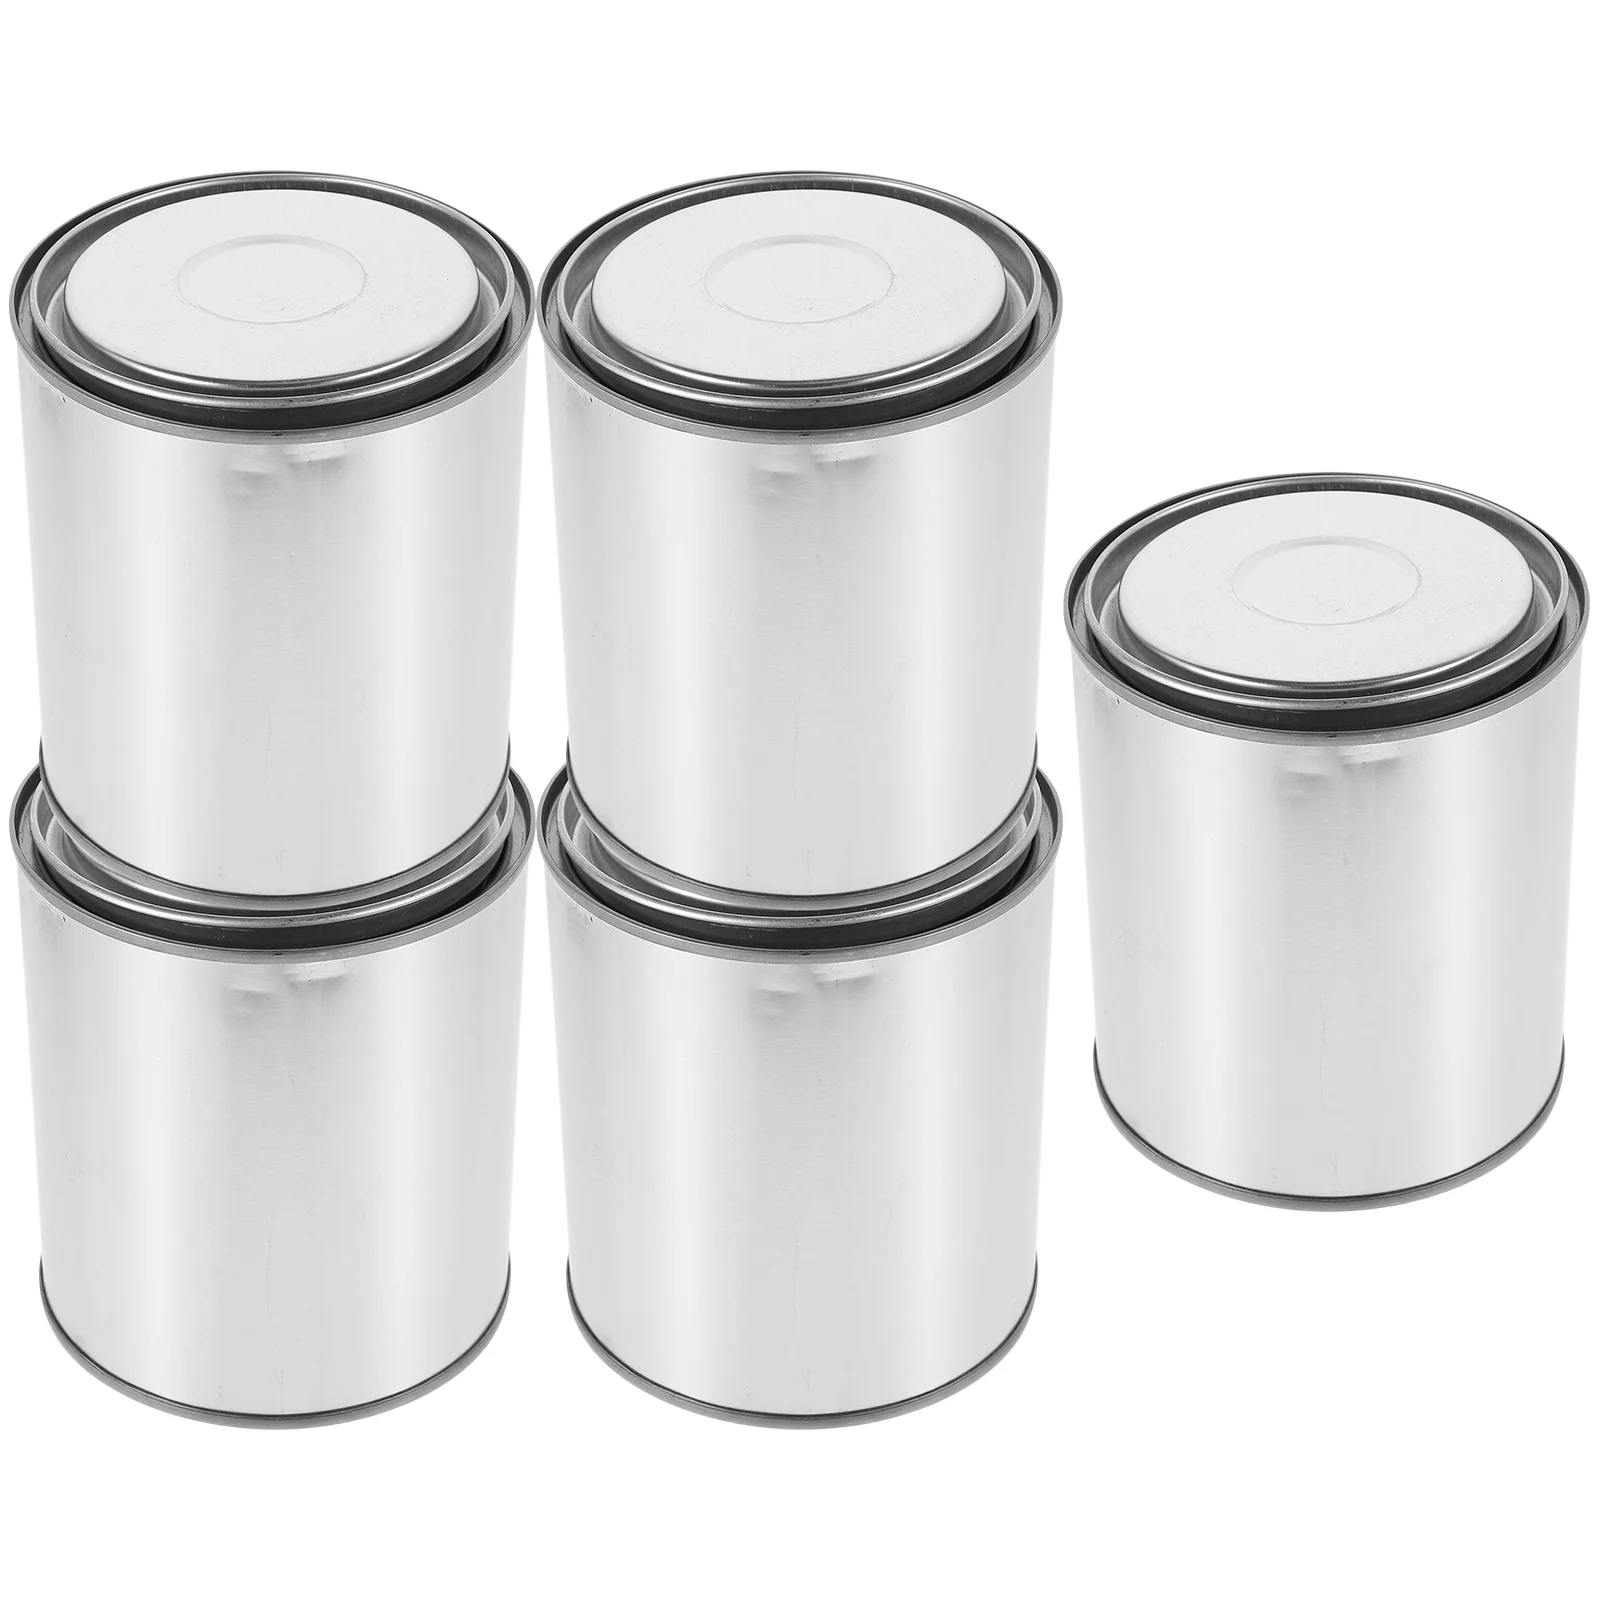 

5pcs Empty Paint Buckets Pitch Storage Can Sealed Empty Metal Paint Cans Pitch Metal Containers